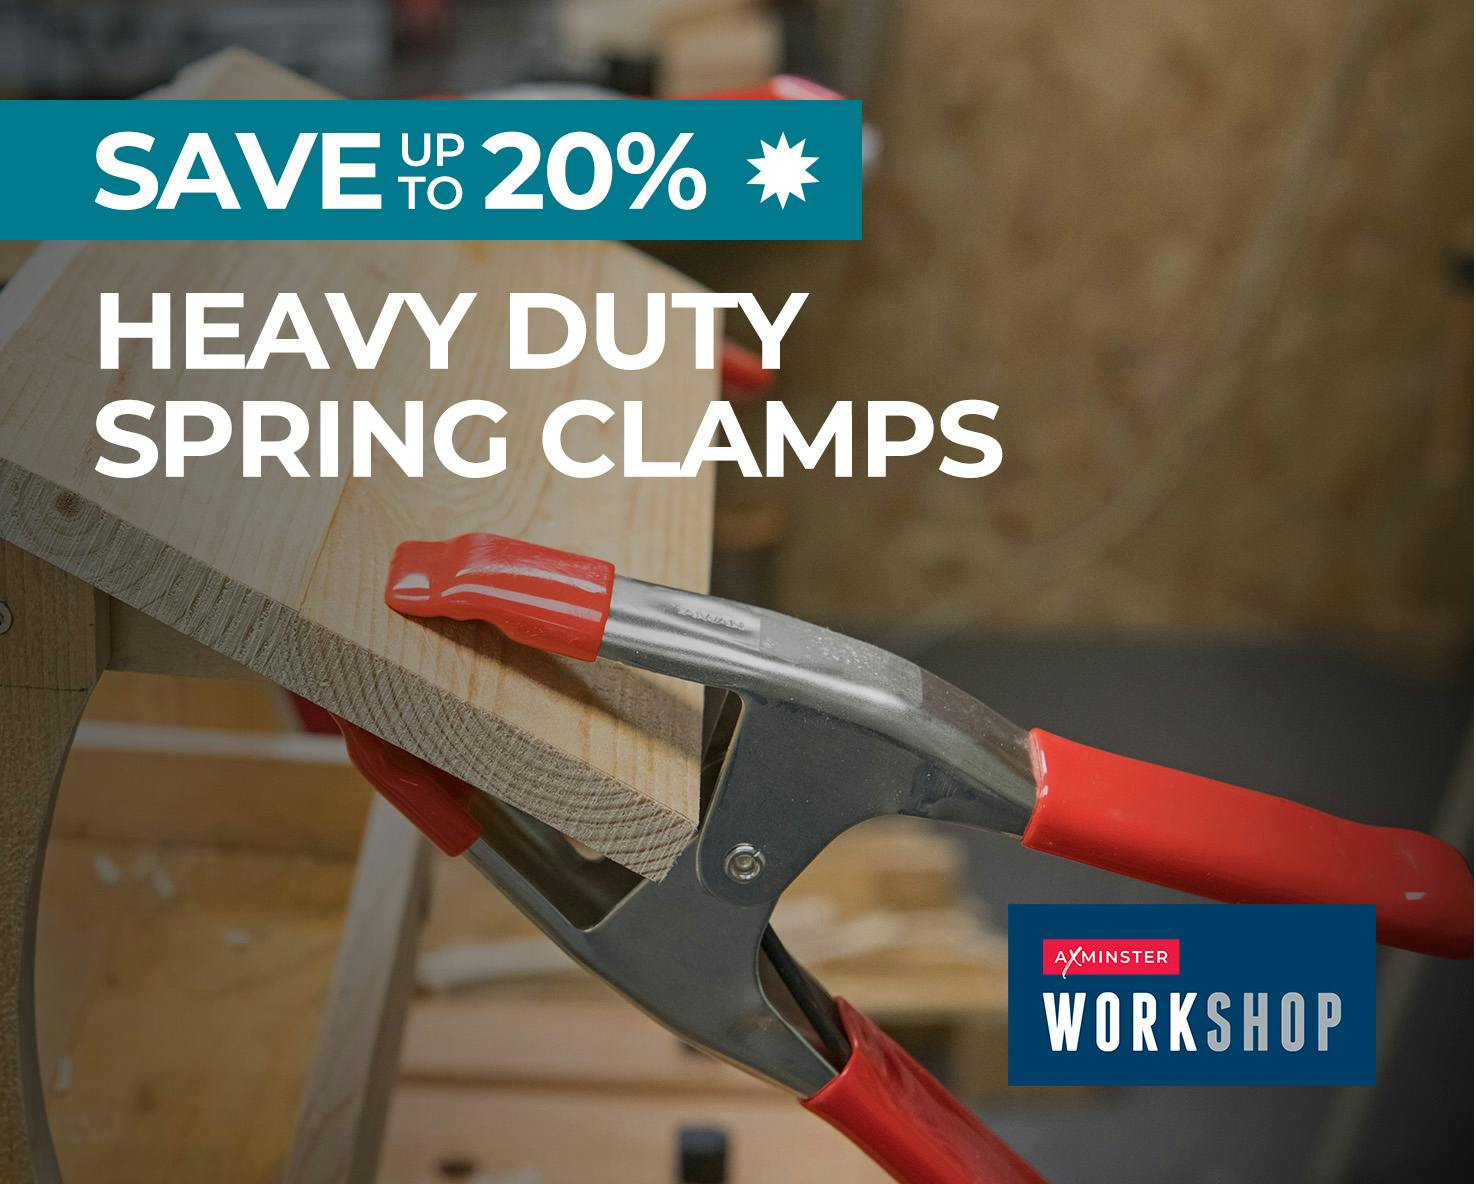 SAVE up to 20% - Axminster Workshop Heavy Duty Spring Clamps